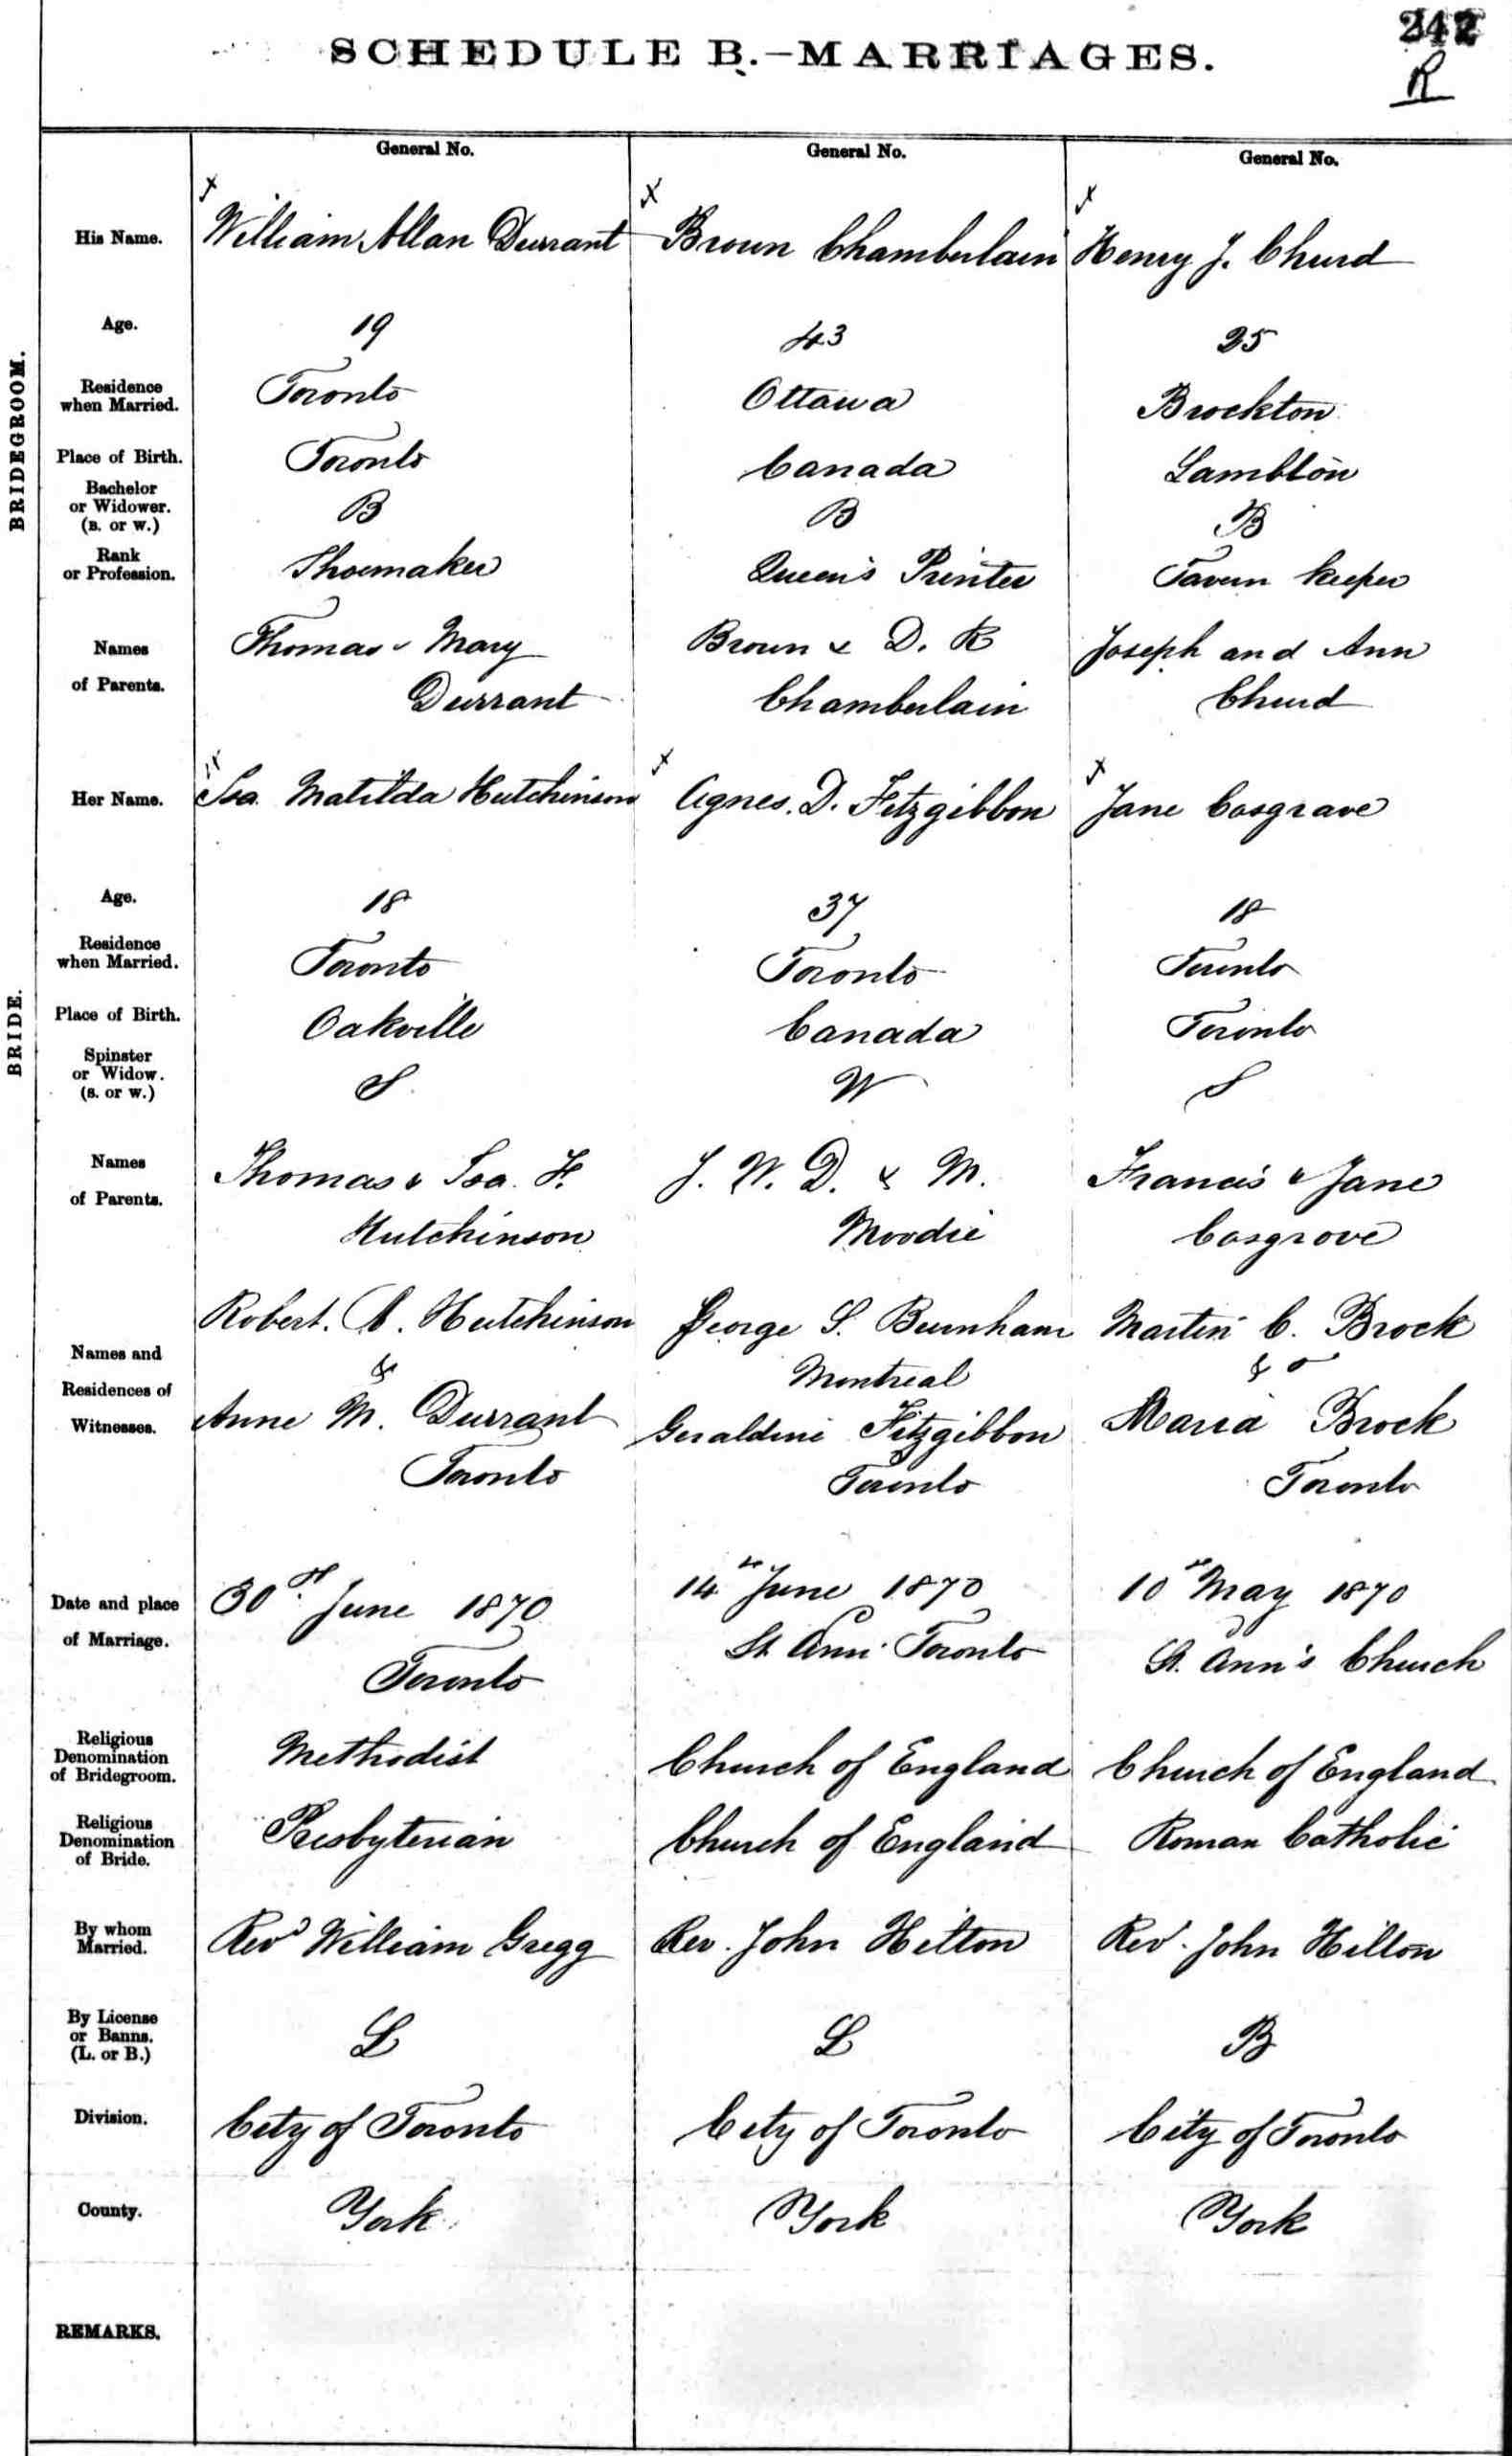 marriage record - brown chamberlain + agnes moodie 1870.jpg